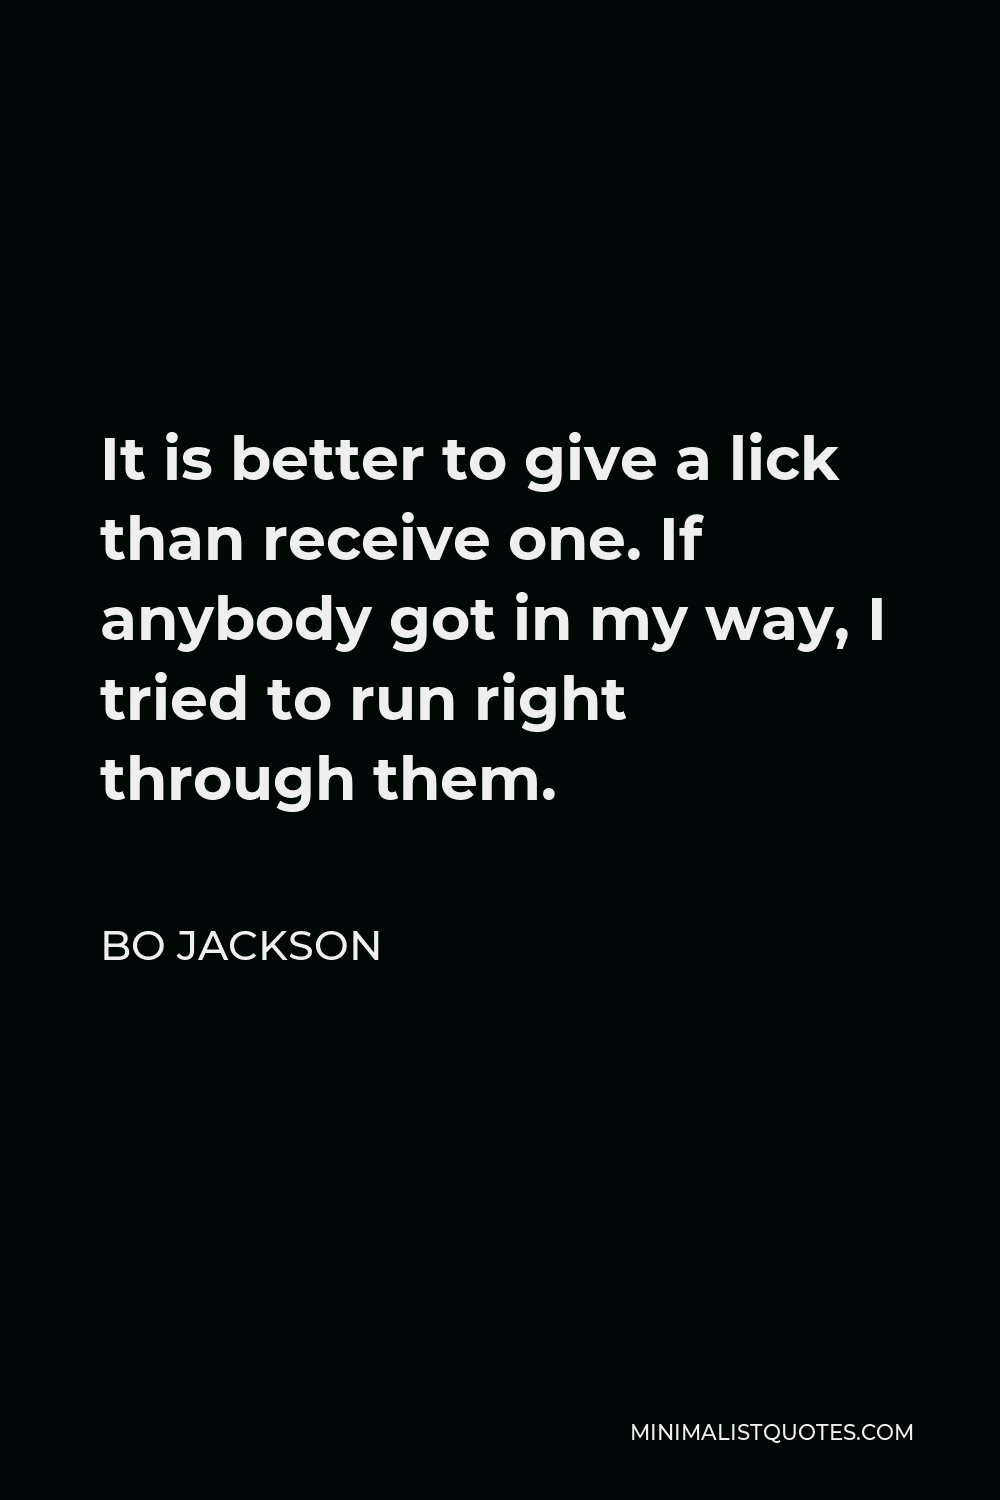 Bo Jackson Quote - It is better to give a lick than receive one. If anybody got in my way, I tried to run right through them.